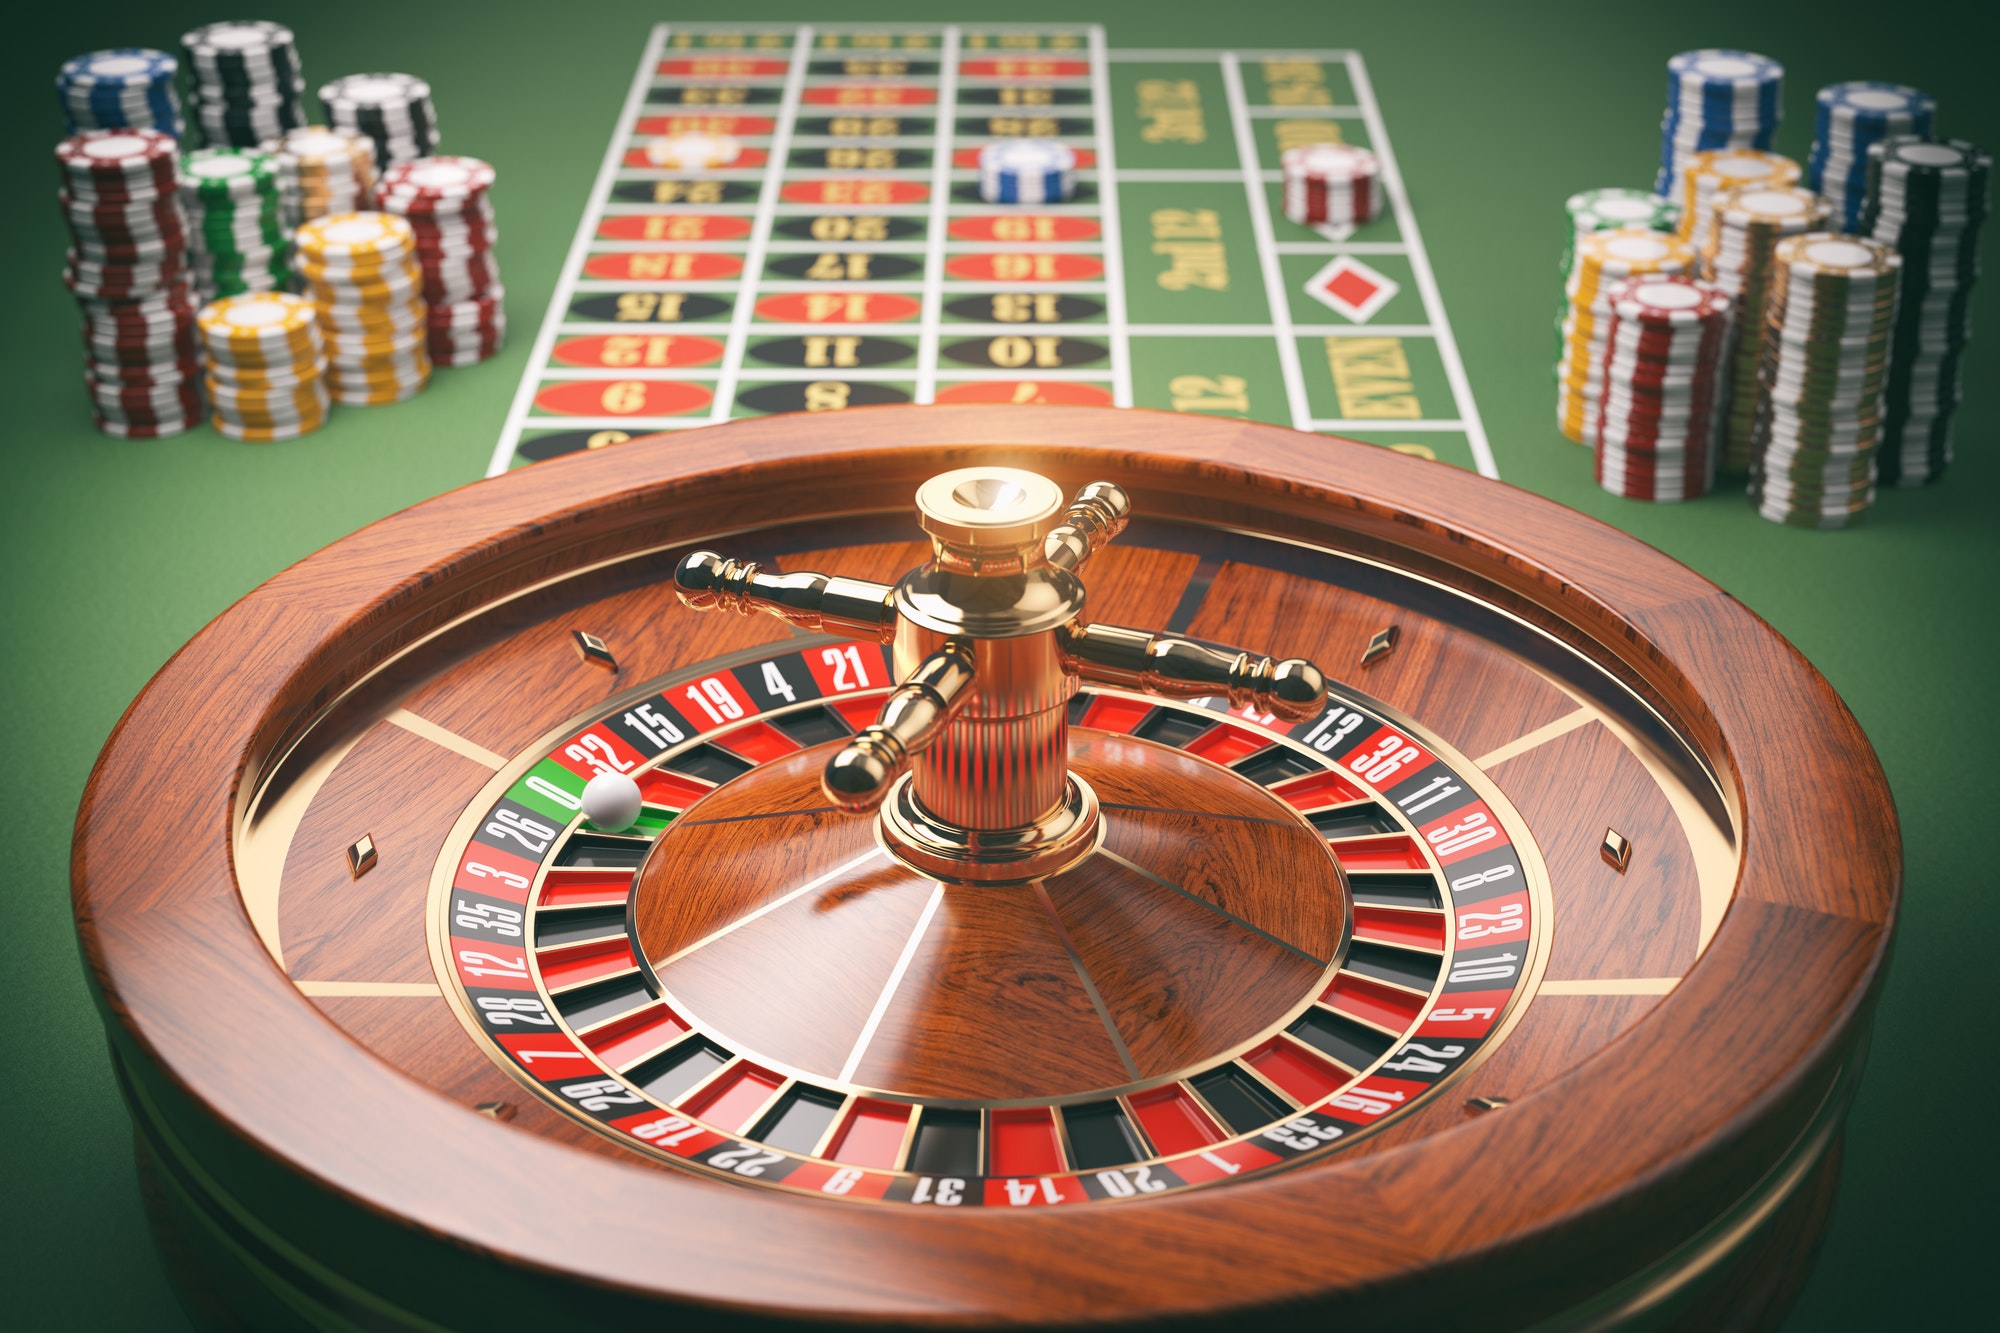 Casino roulette wheel with casino chips on green table. Gambling